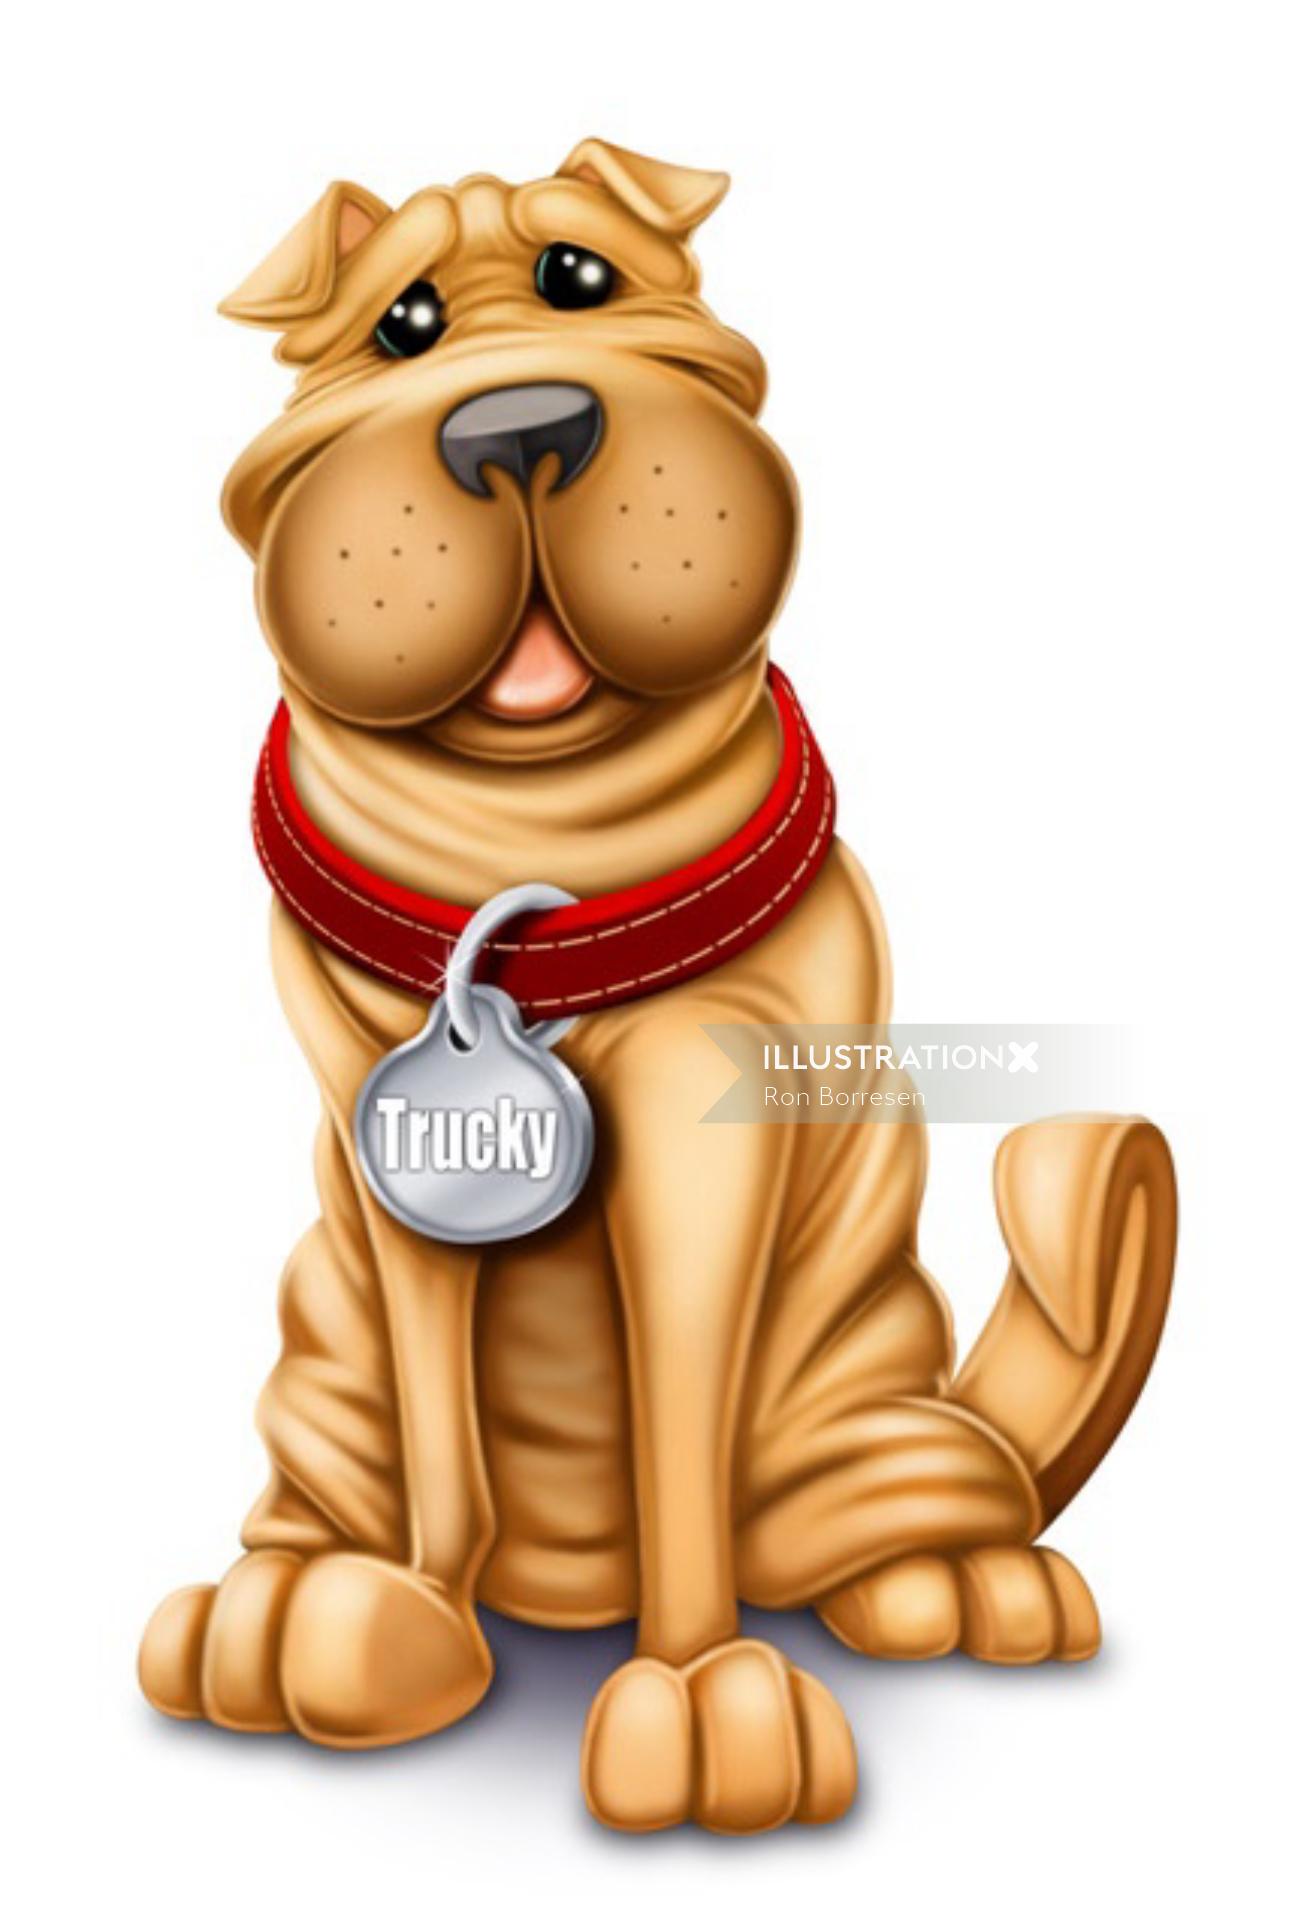 Character design tucky the dog
